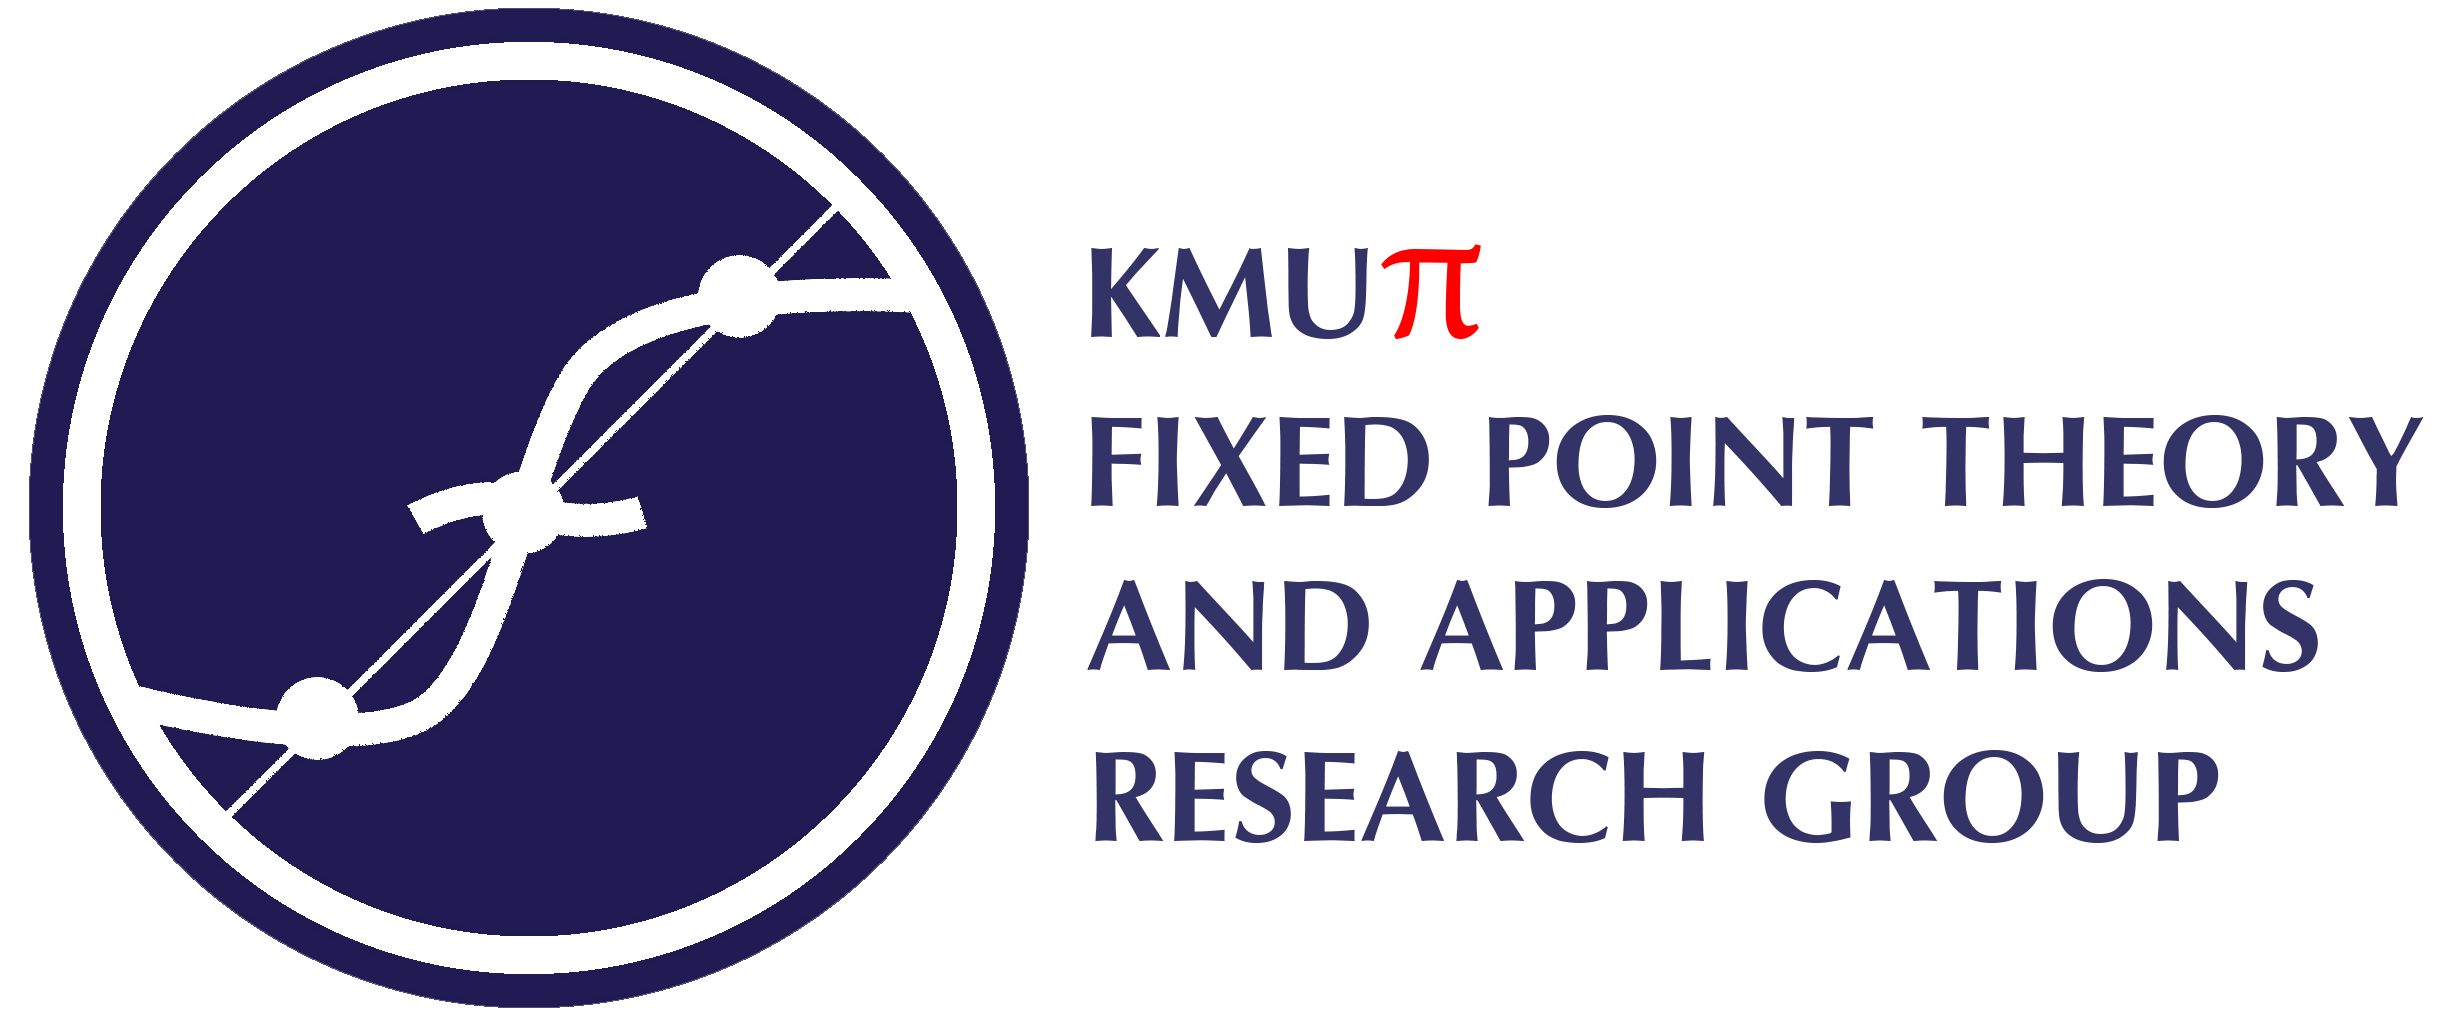 KMUTT-Fixed Point Theory and Application Research Group (KMUTT-FPTARG) by KMUTTFixed Point Research Lab.  